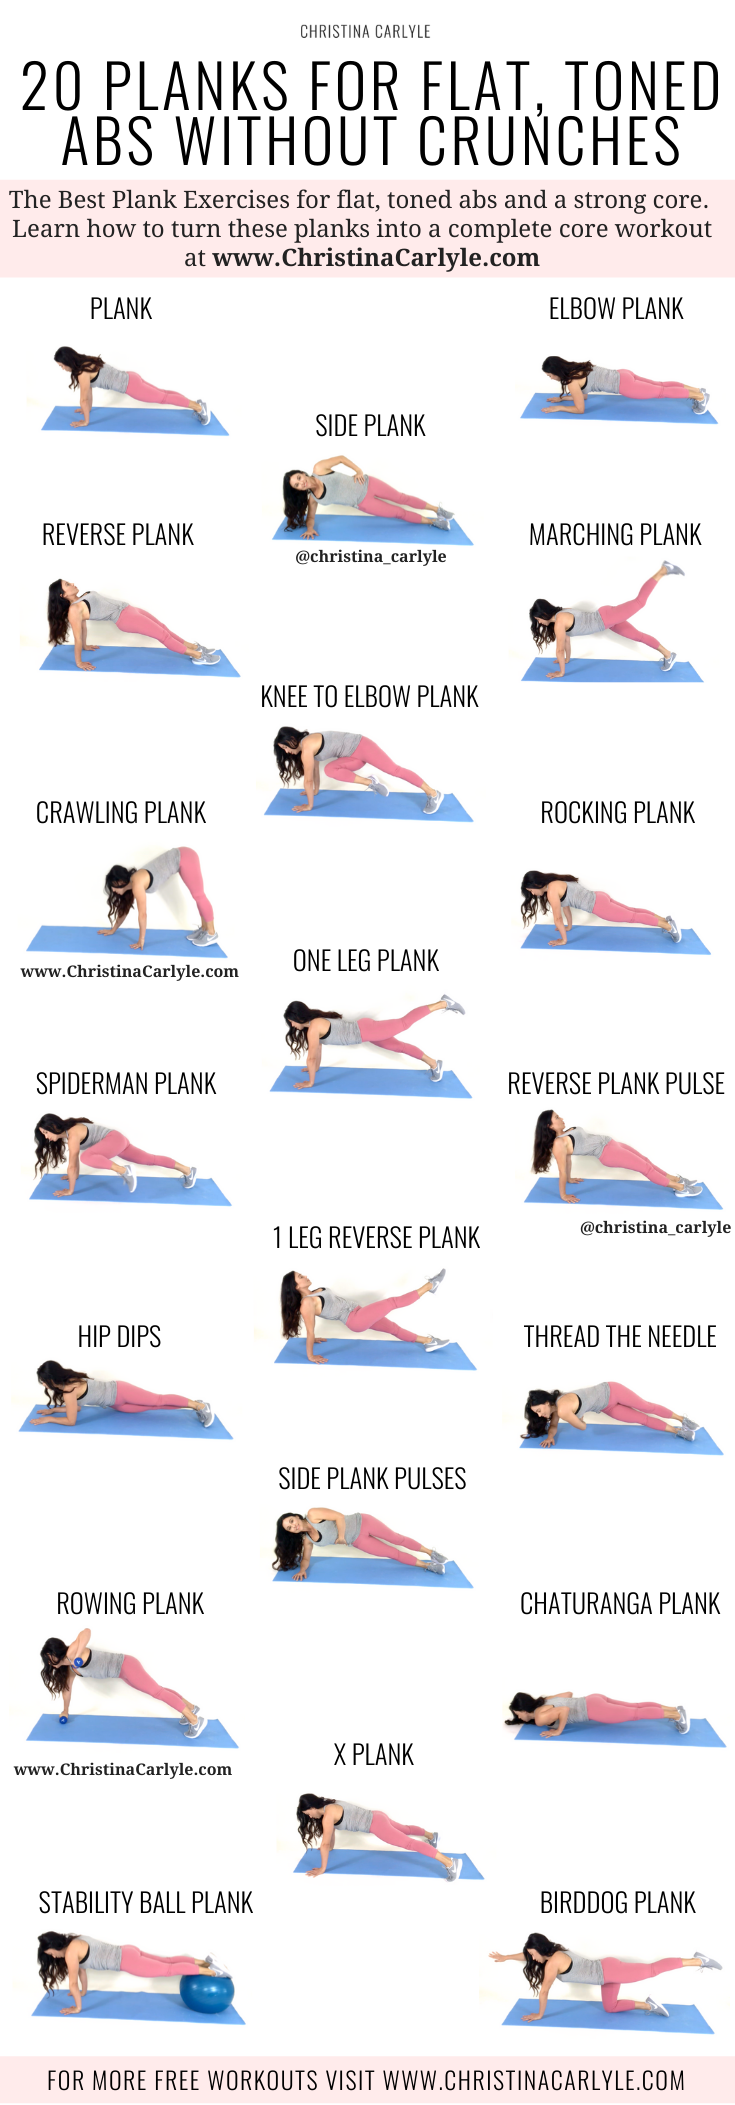 20 Plank Exercises being done by Trainer Christina Carlyle